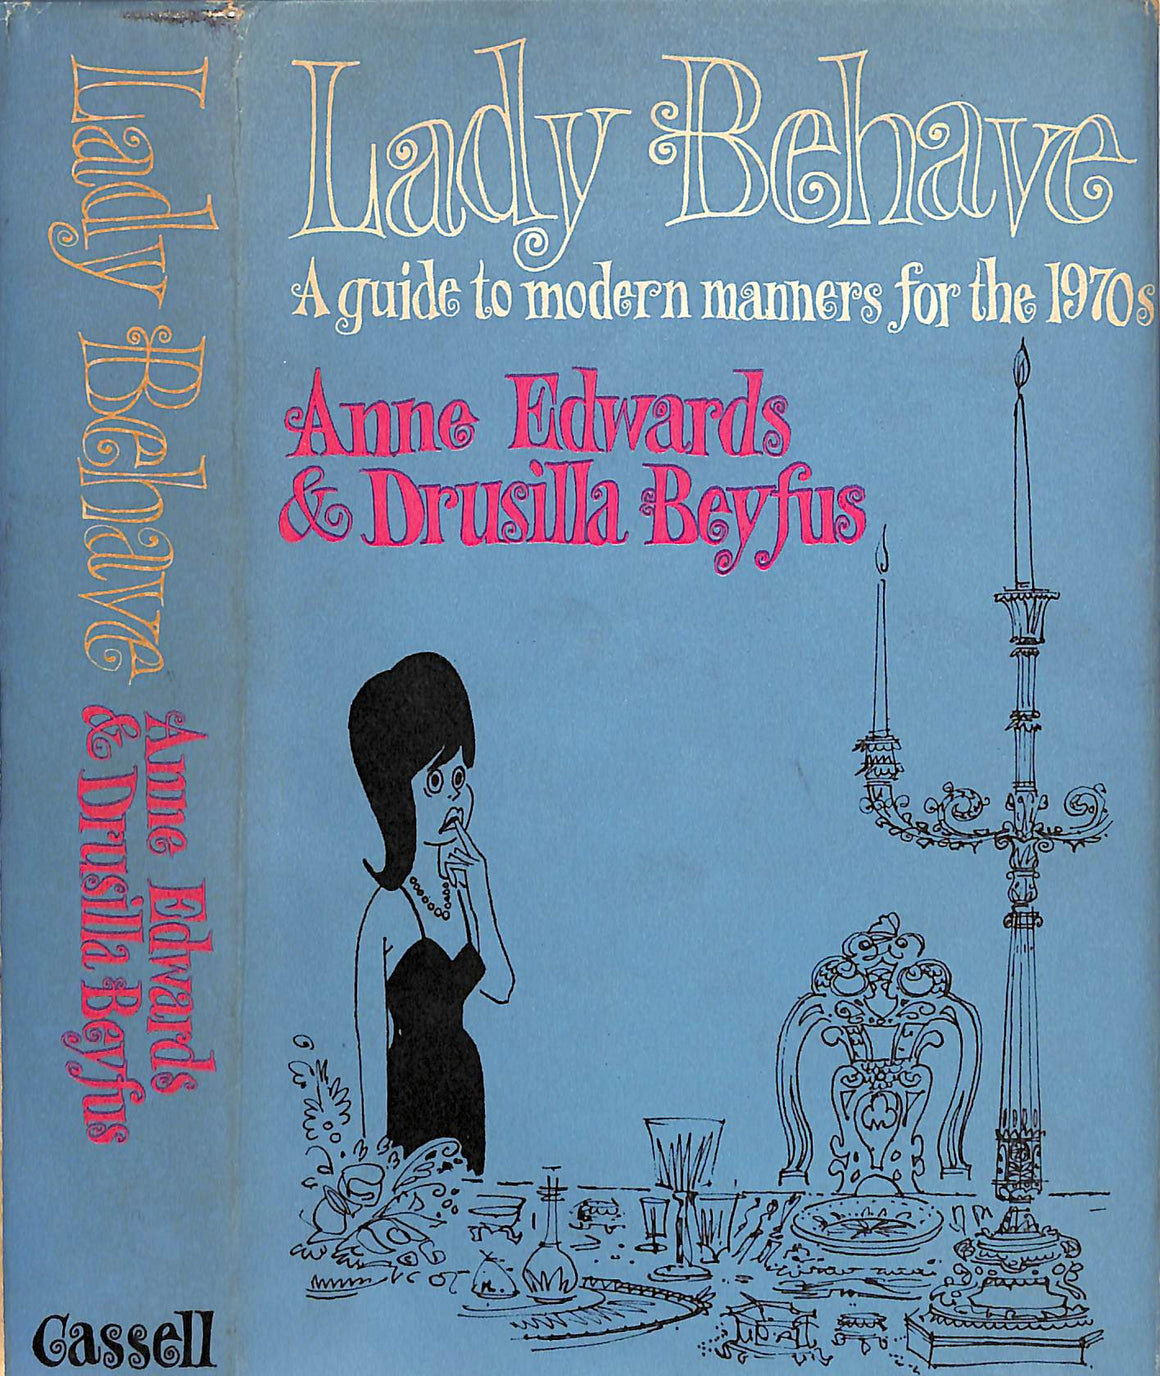 "Lady Behave: A Guide Modern Manners For The 1970s" 1969 EDWARDS, Anne & BEYFUS, Drusilla